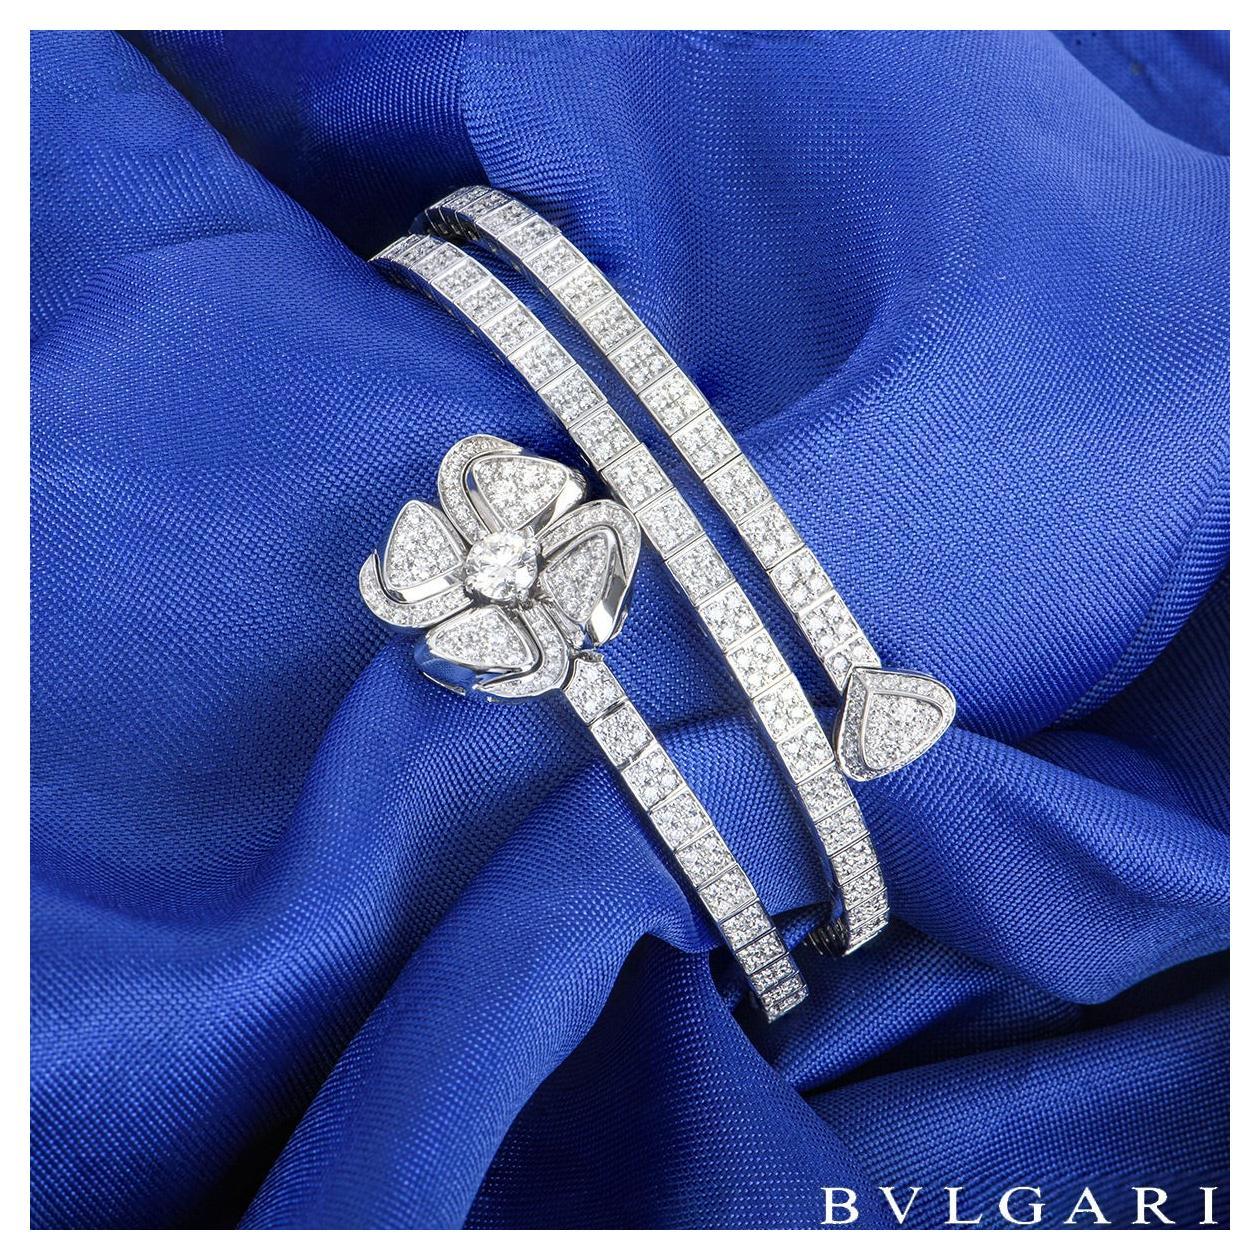 An alluring 18k white gold diamond bracelet by Bvlgari from the Fiorever collection. The bracelet coils around the wrist with a flower motif at one end and a single petal motif at the other. The bracelet is set with 515 round brilliant cut diamonds